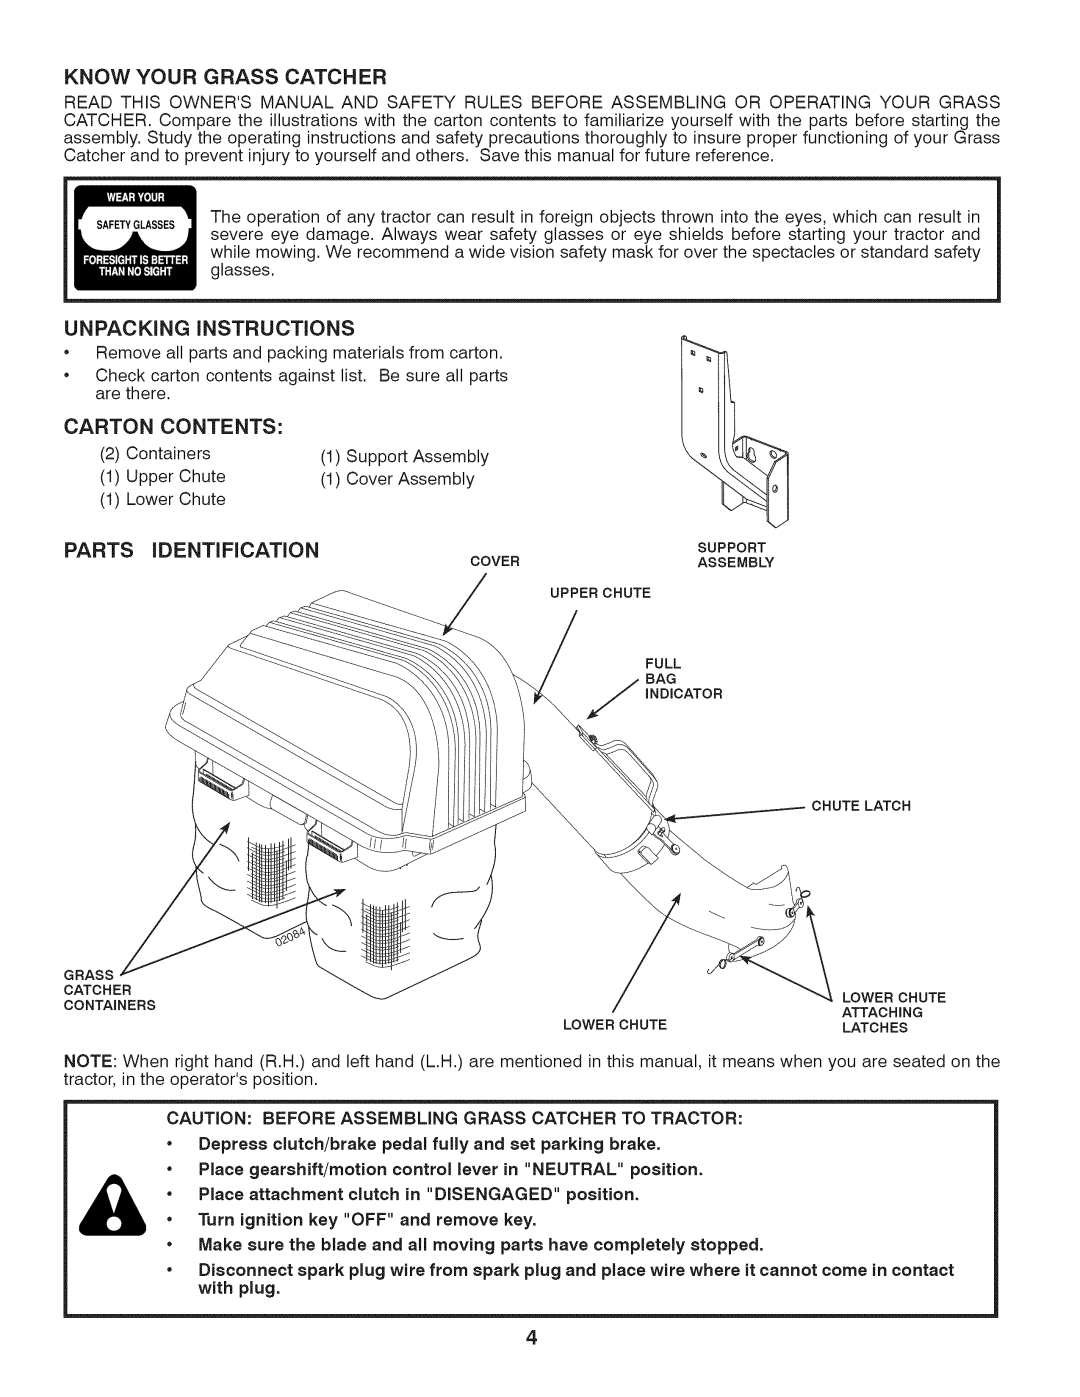 Craftsman 917.24903 owner manual Know Your Grass Catcher, Unpacking, Instructions, Carton, Contents, Parts Identification 